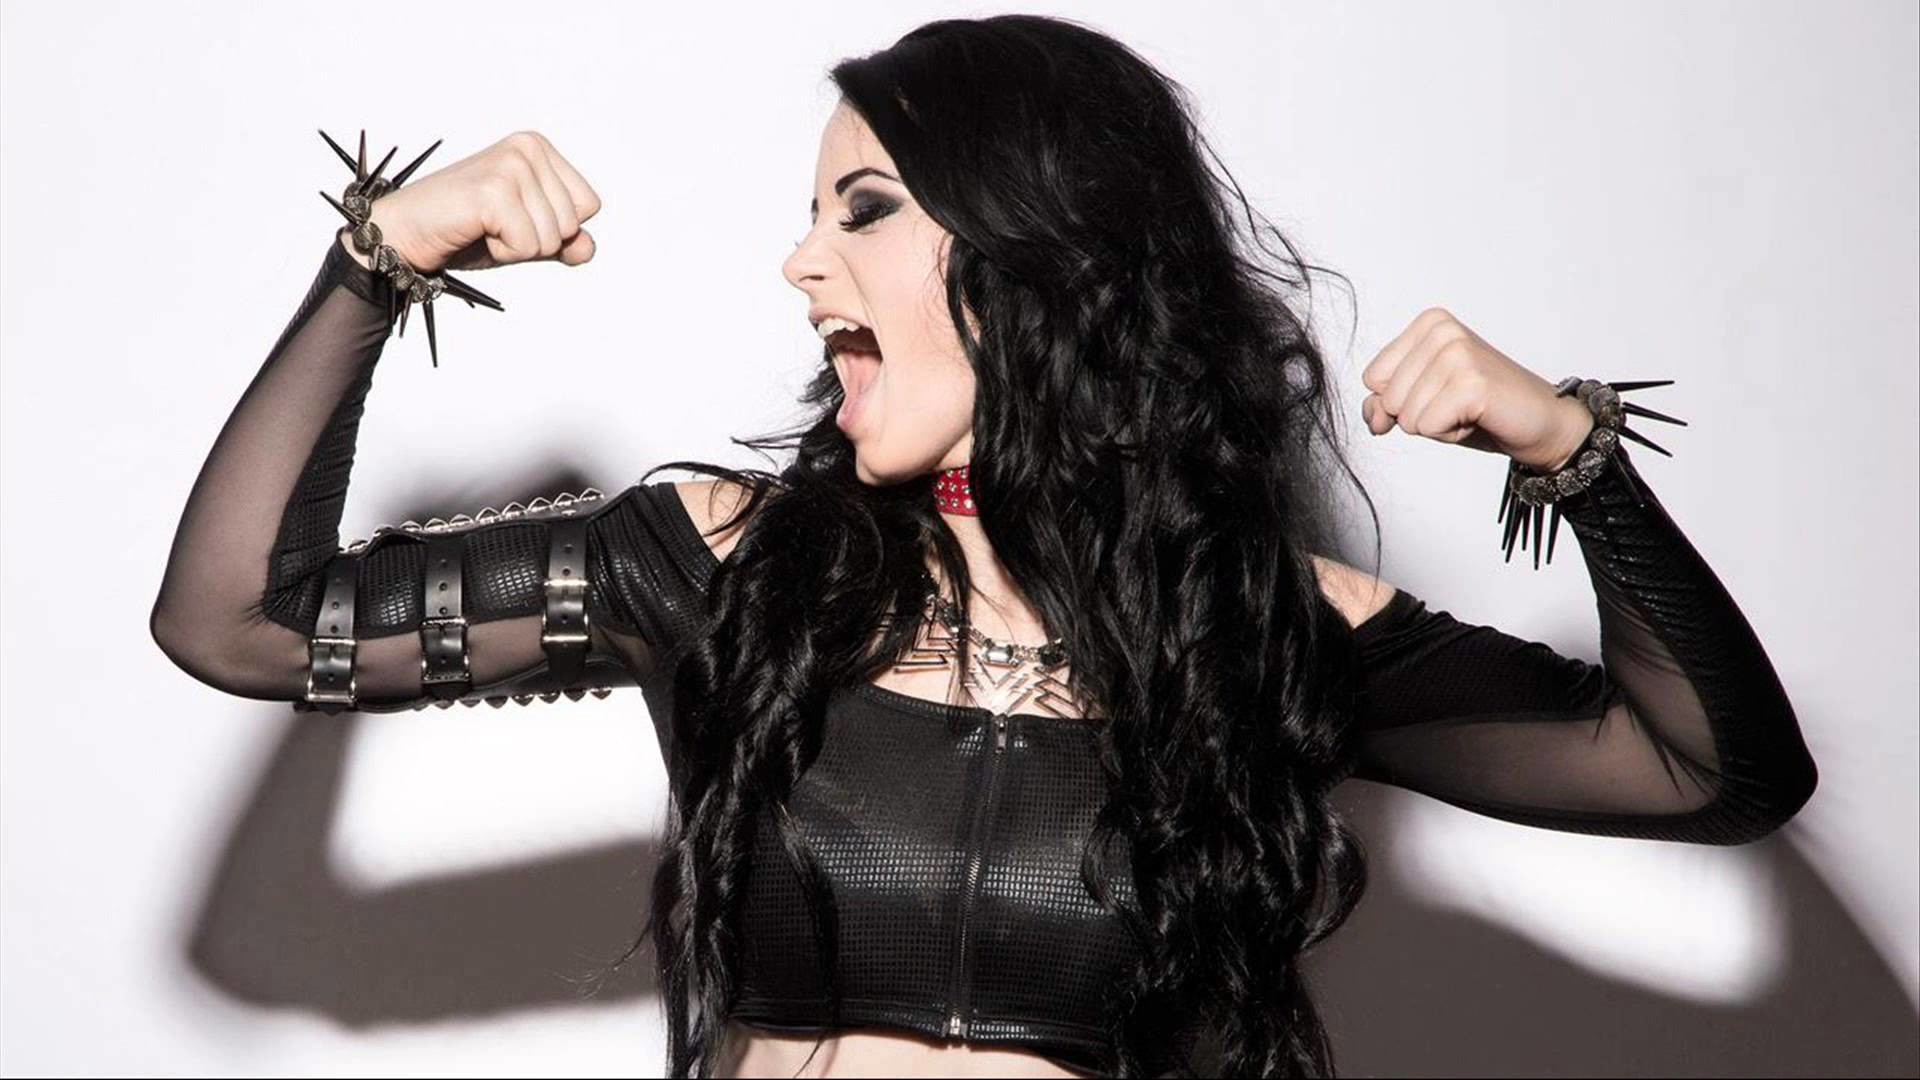 1920x1080 Paige HD Wallpapers (4)